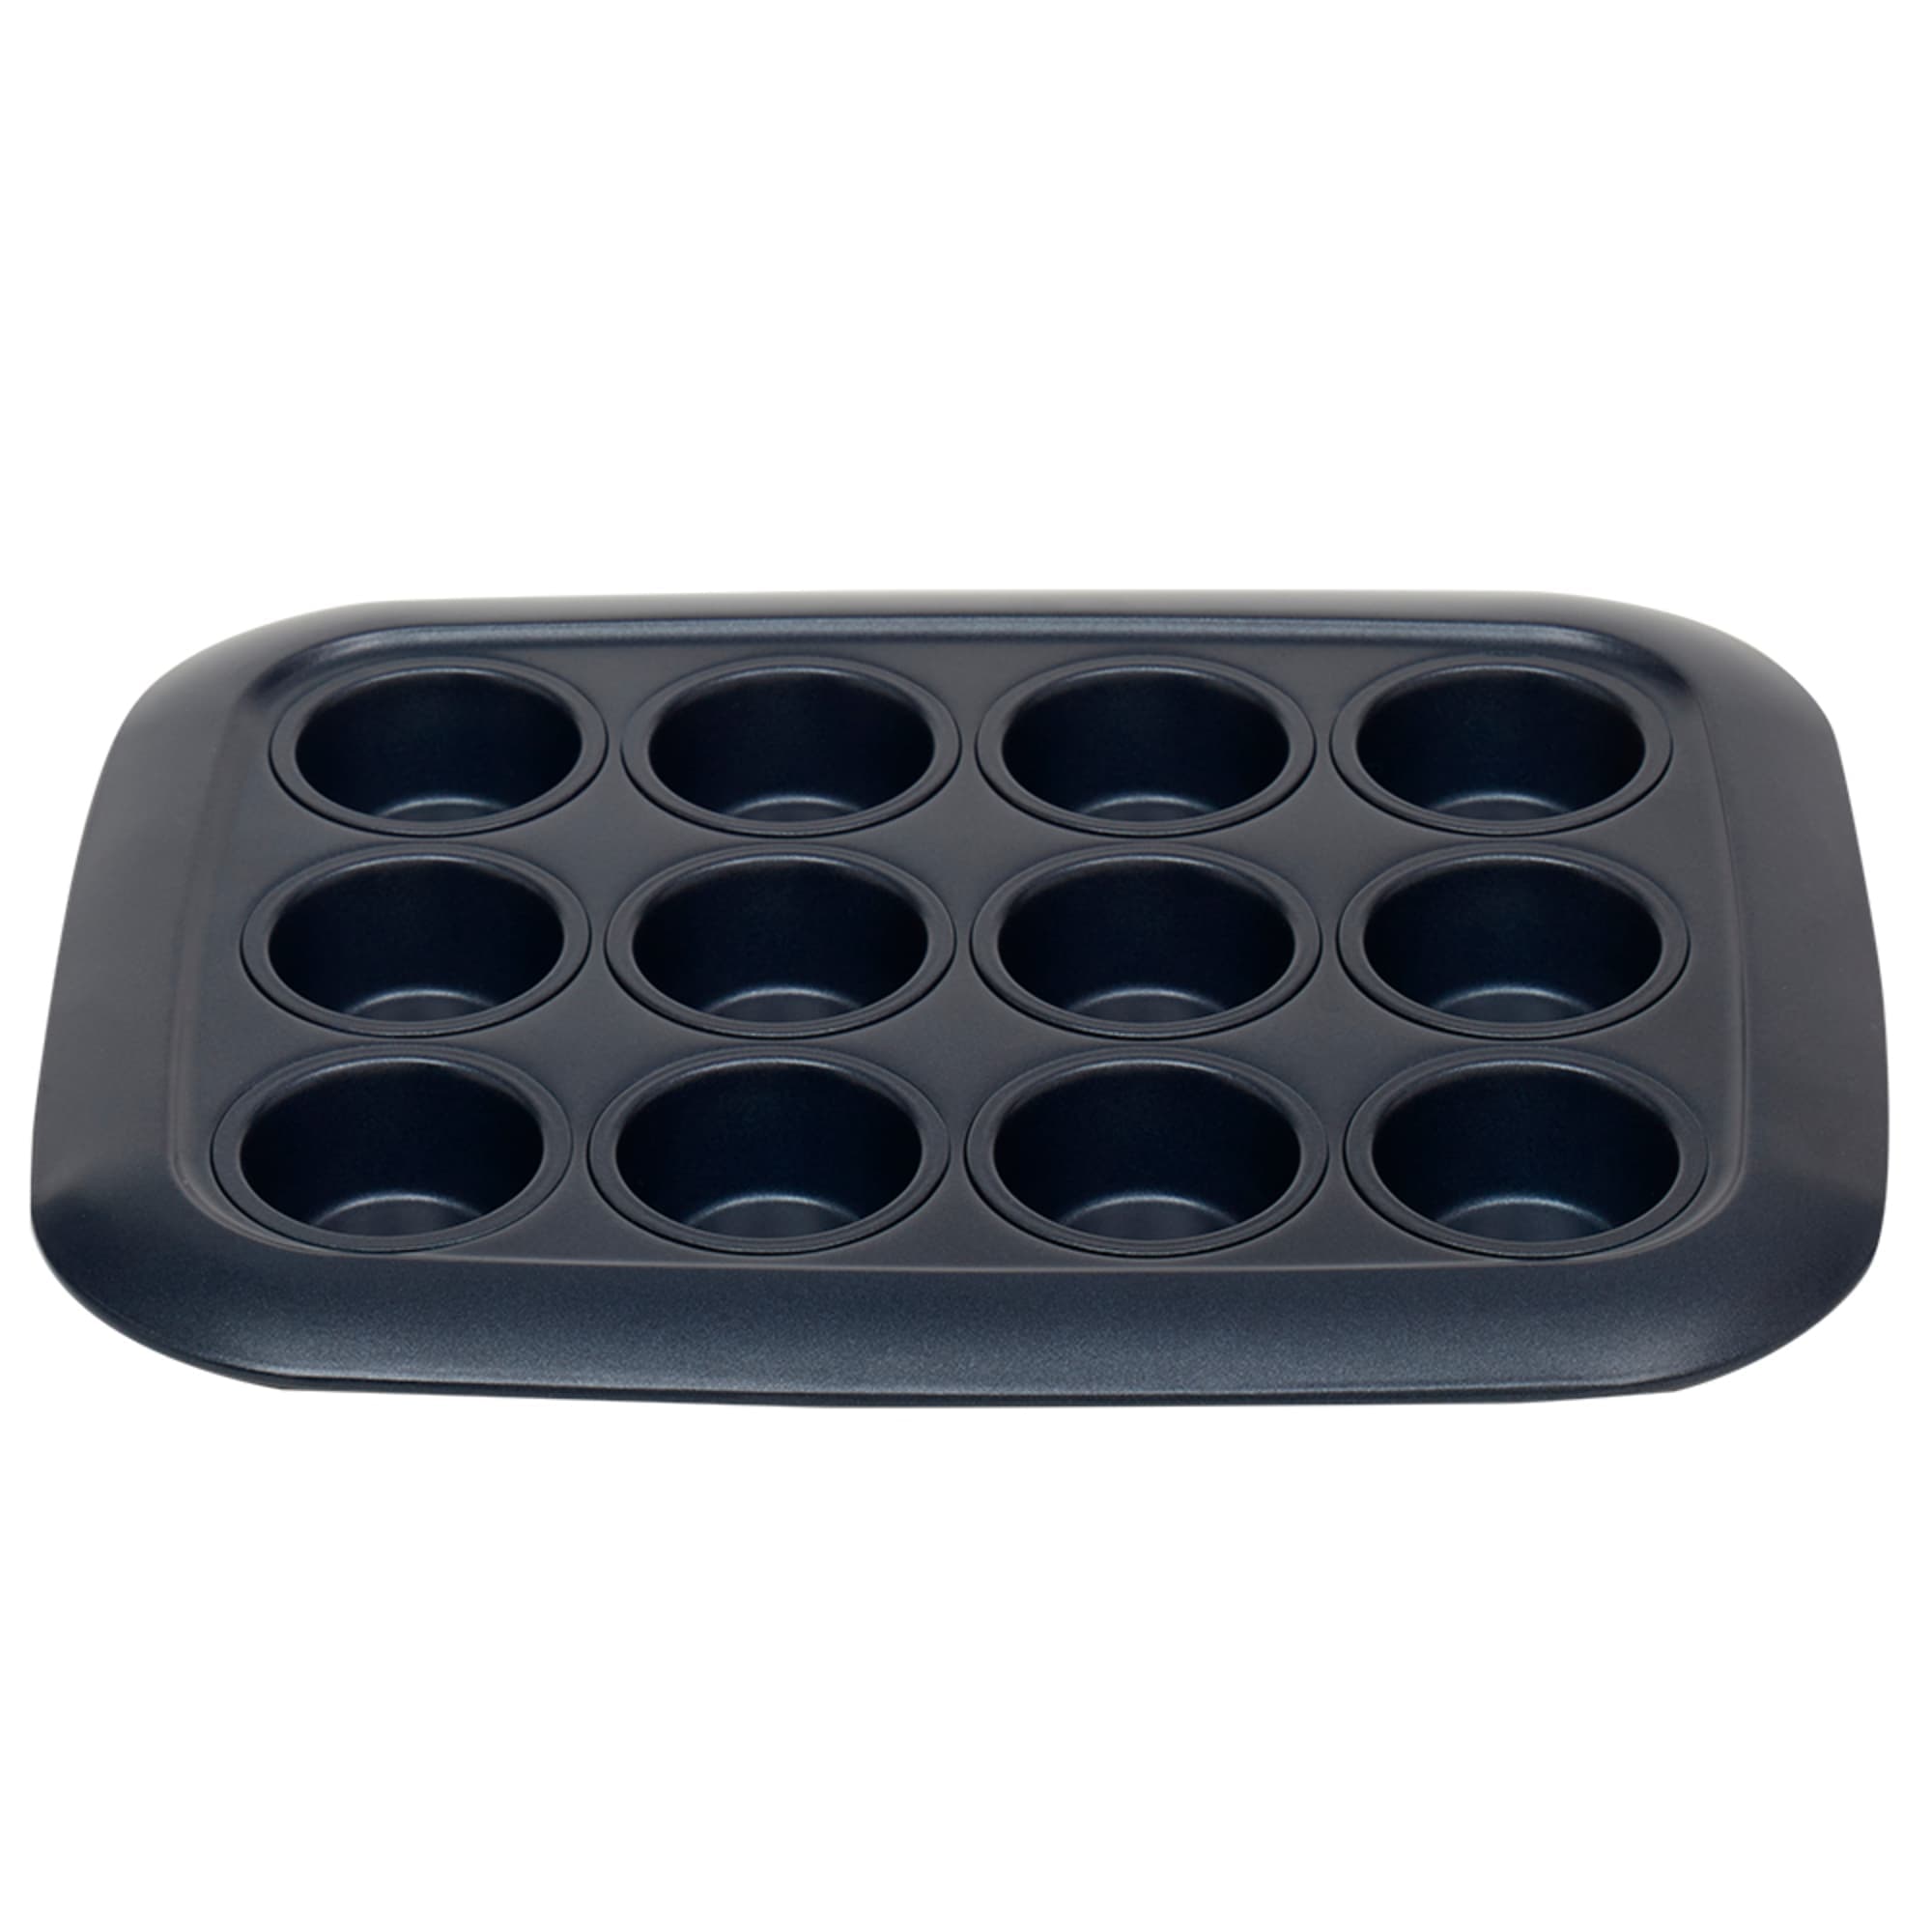 Michael Graves Design Non-Stick 12 Mini Cup Carbon Steel Muffin Pan, Indigo $7.00 EACH, CASE PACK OF 12